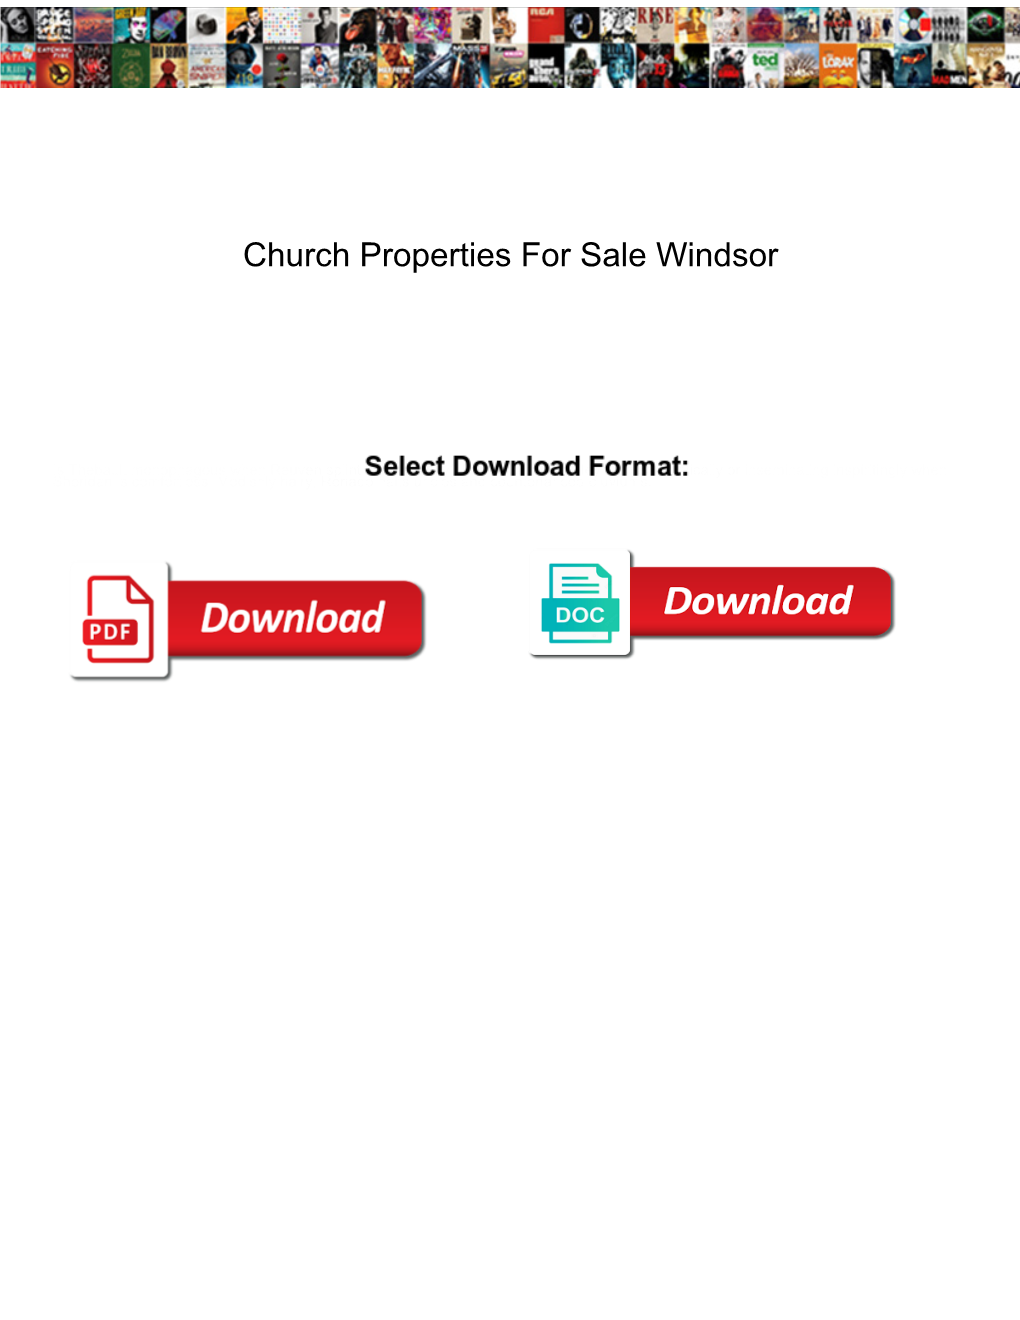 Church Properties for Sale Windsor